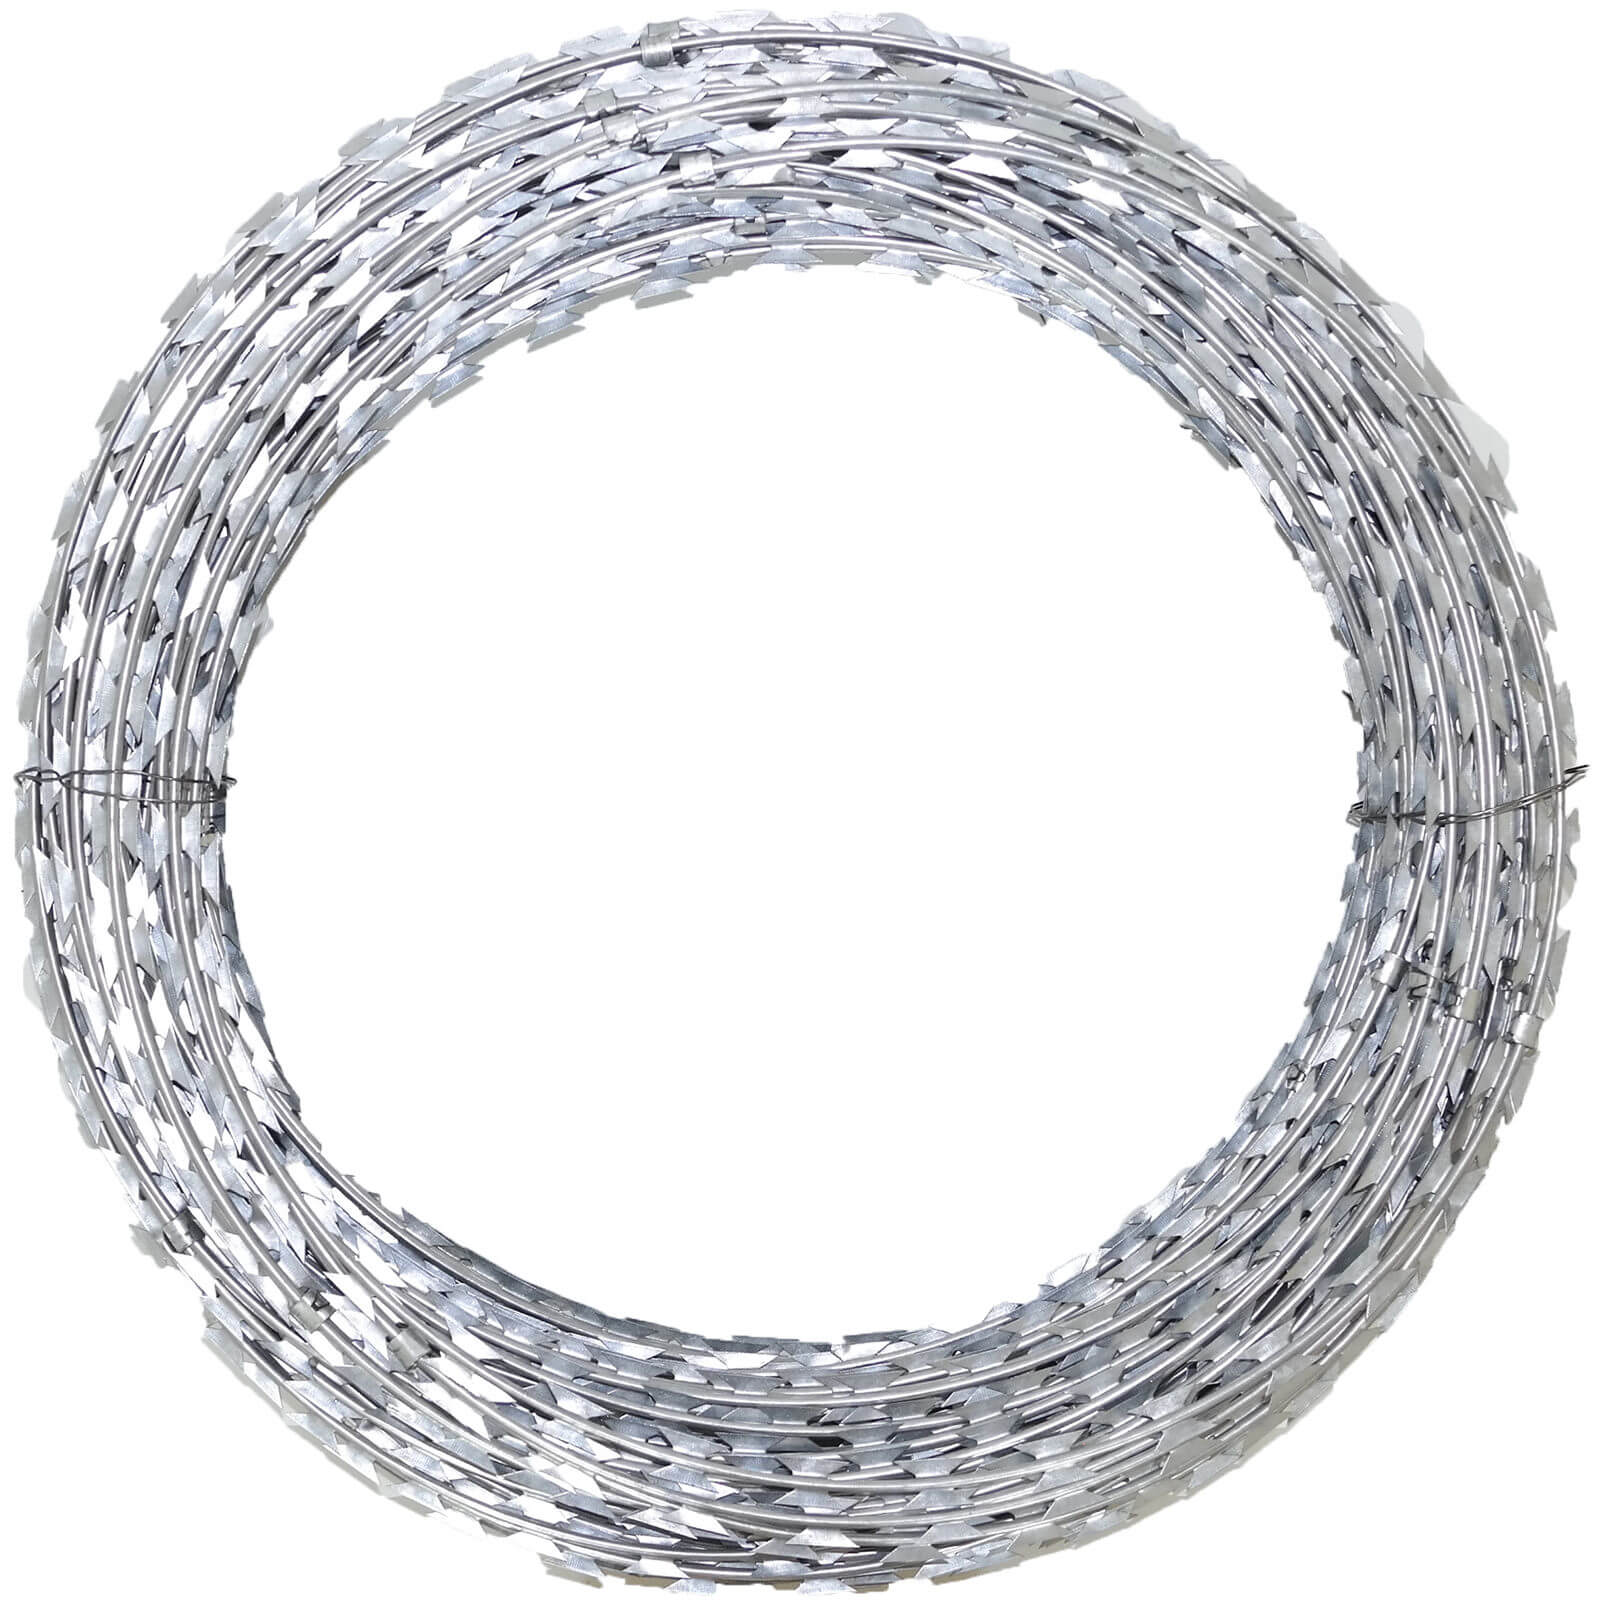 Razor Wire Fencing: Ensuring Peace of Mind